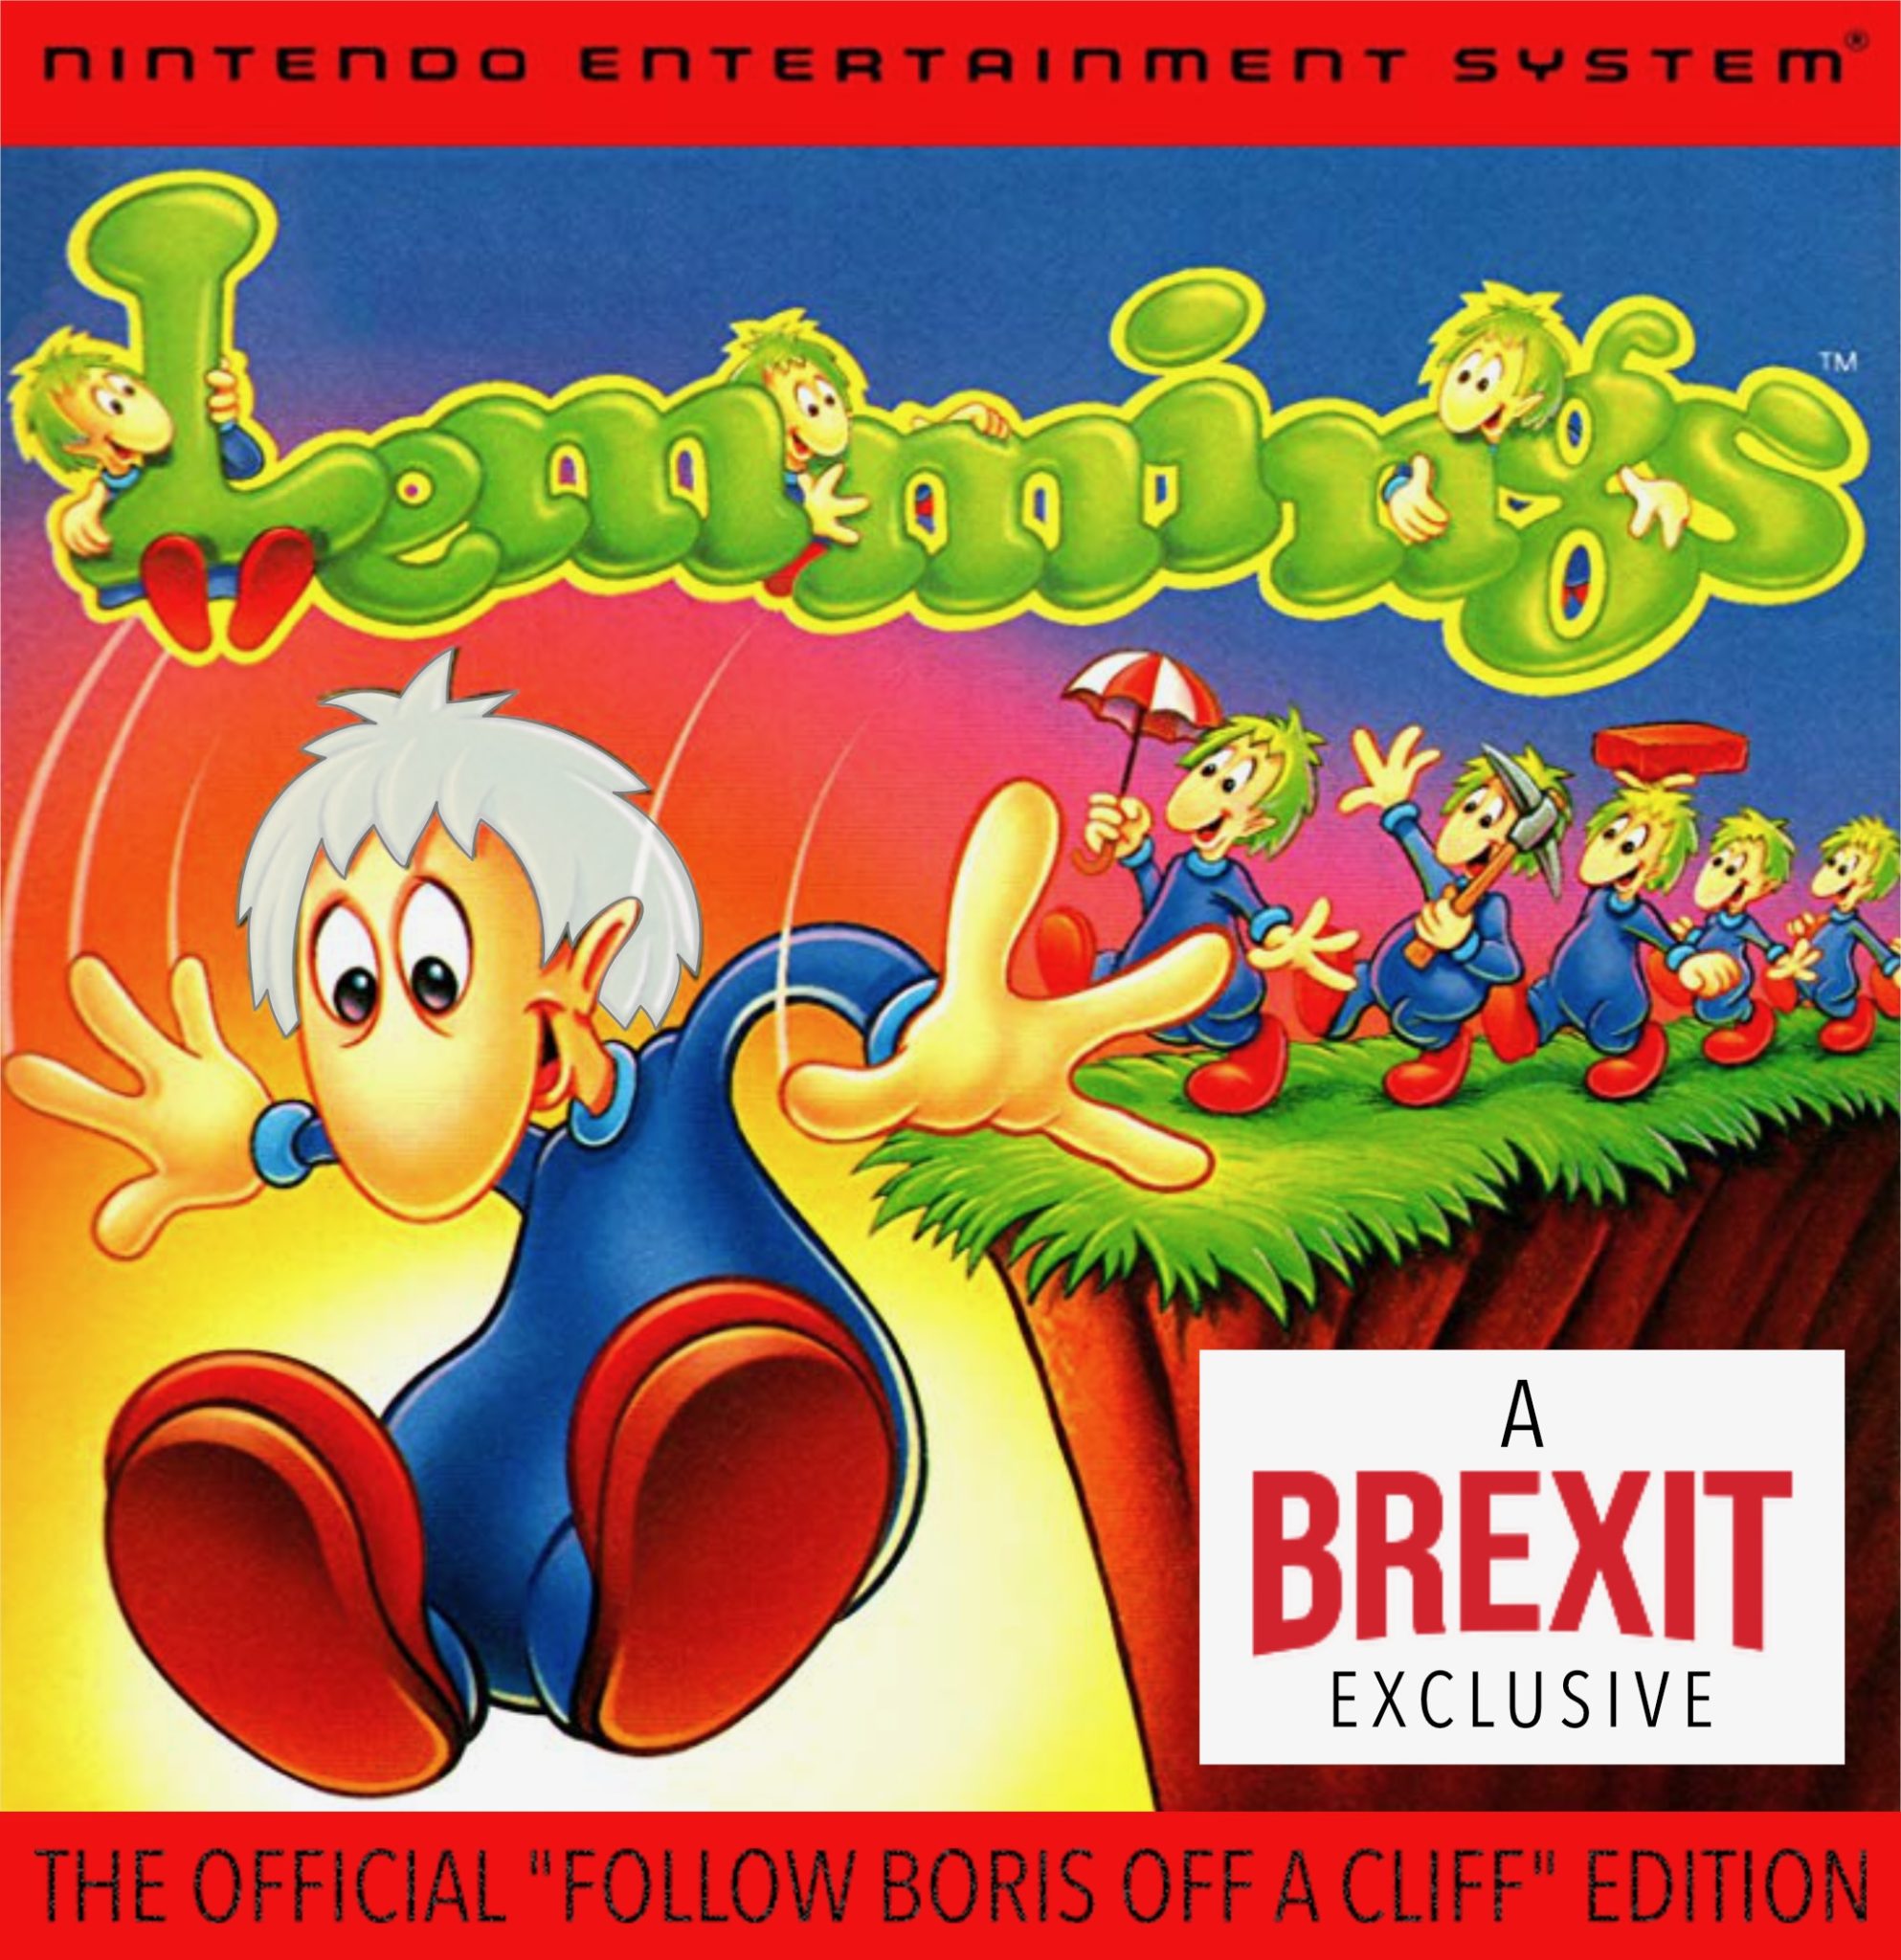 Lemmings (video game), the official "Follow Boris off a cliff" edition.